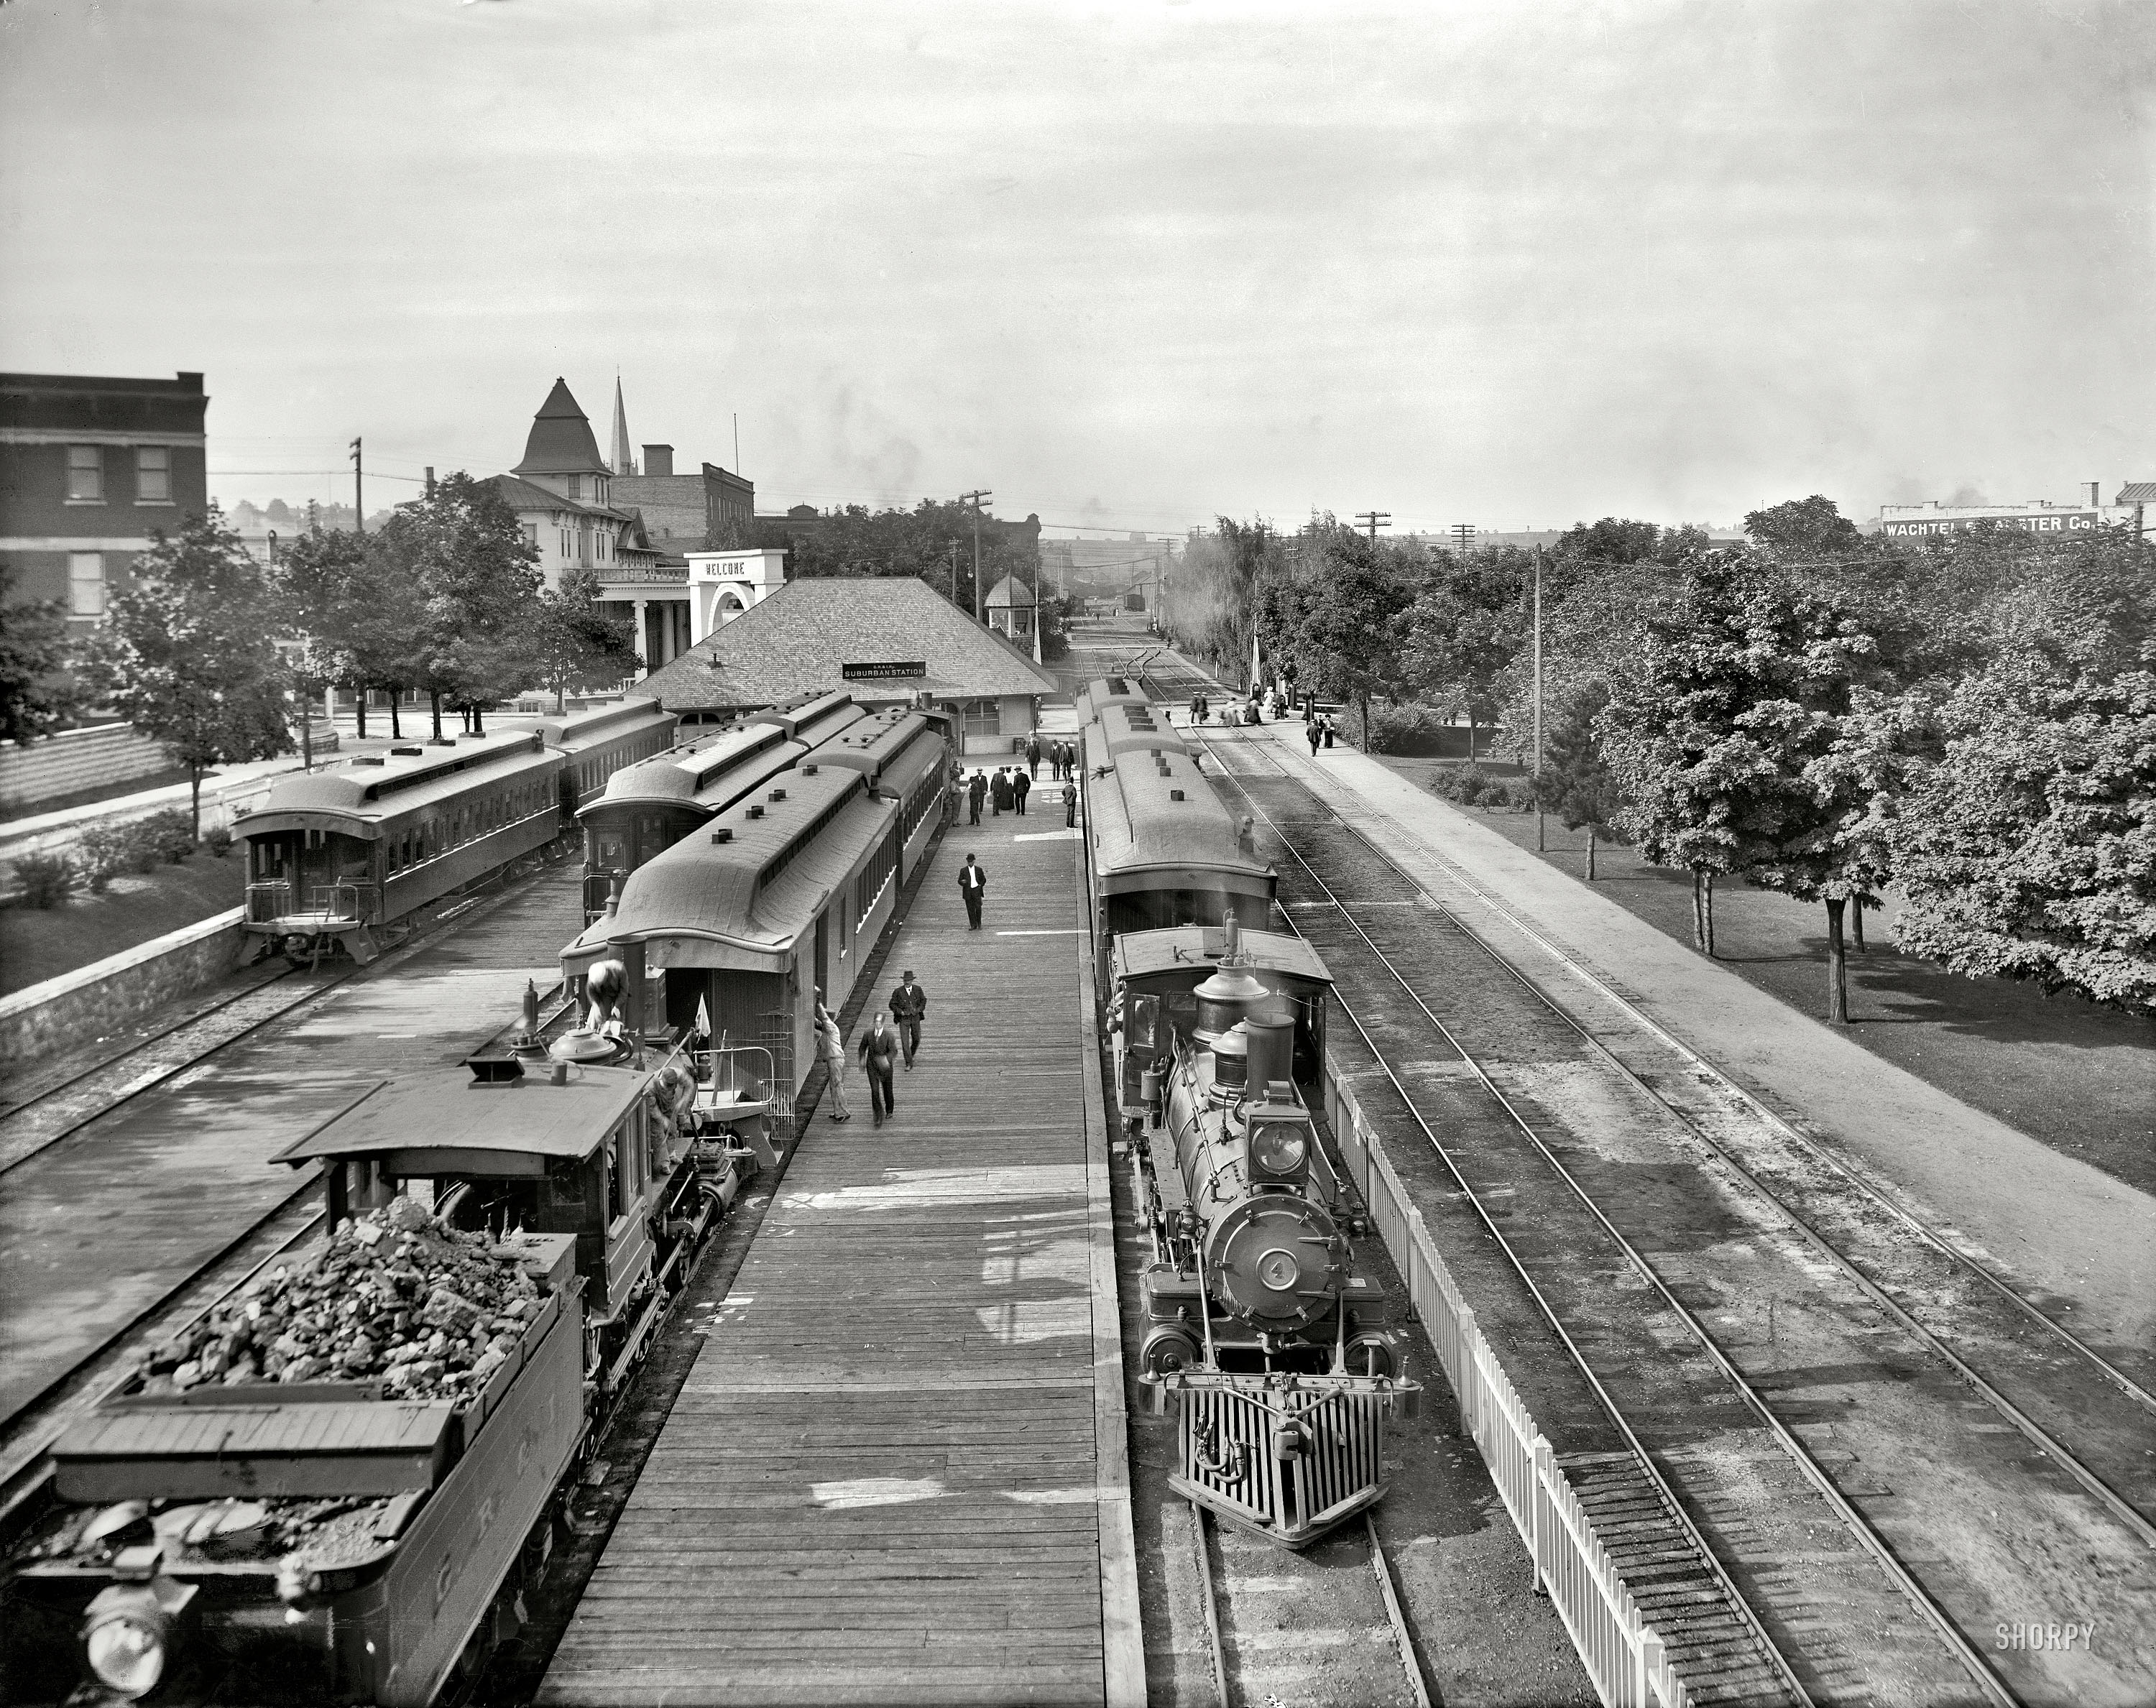 Circa 1908. "Suburban station, Petoskey, Michigan." Yet another glimpse of this bustling burg. 8x10 inch glass negative, Detroit Publishing Co. View full size.